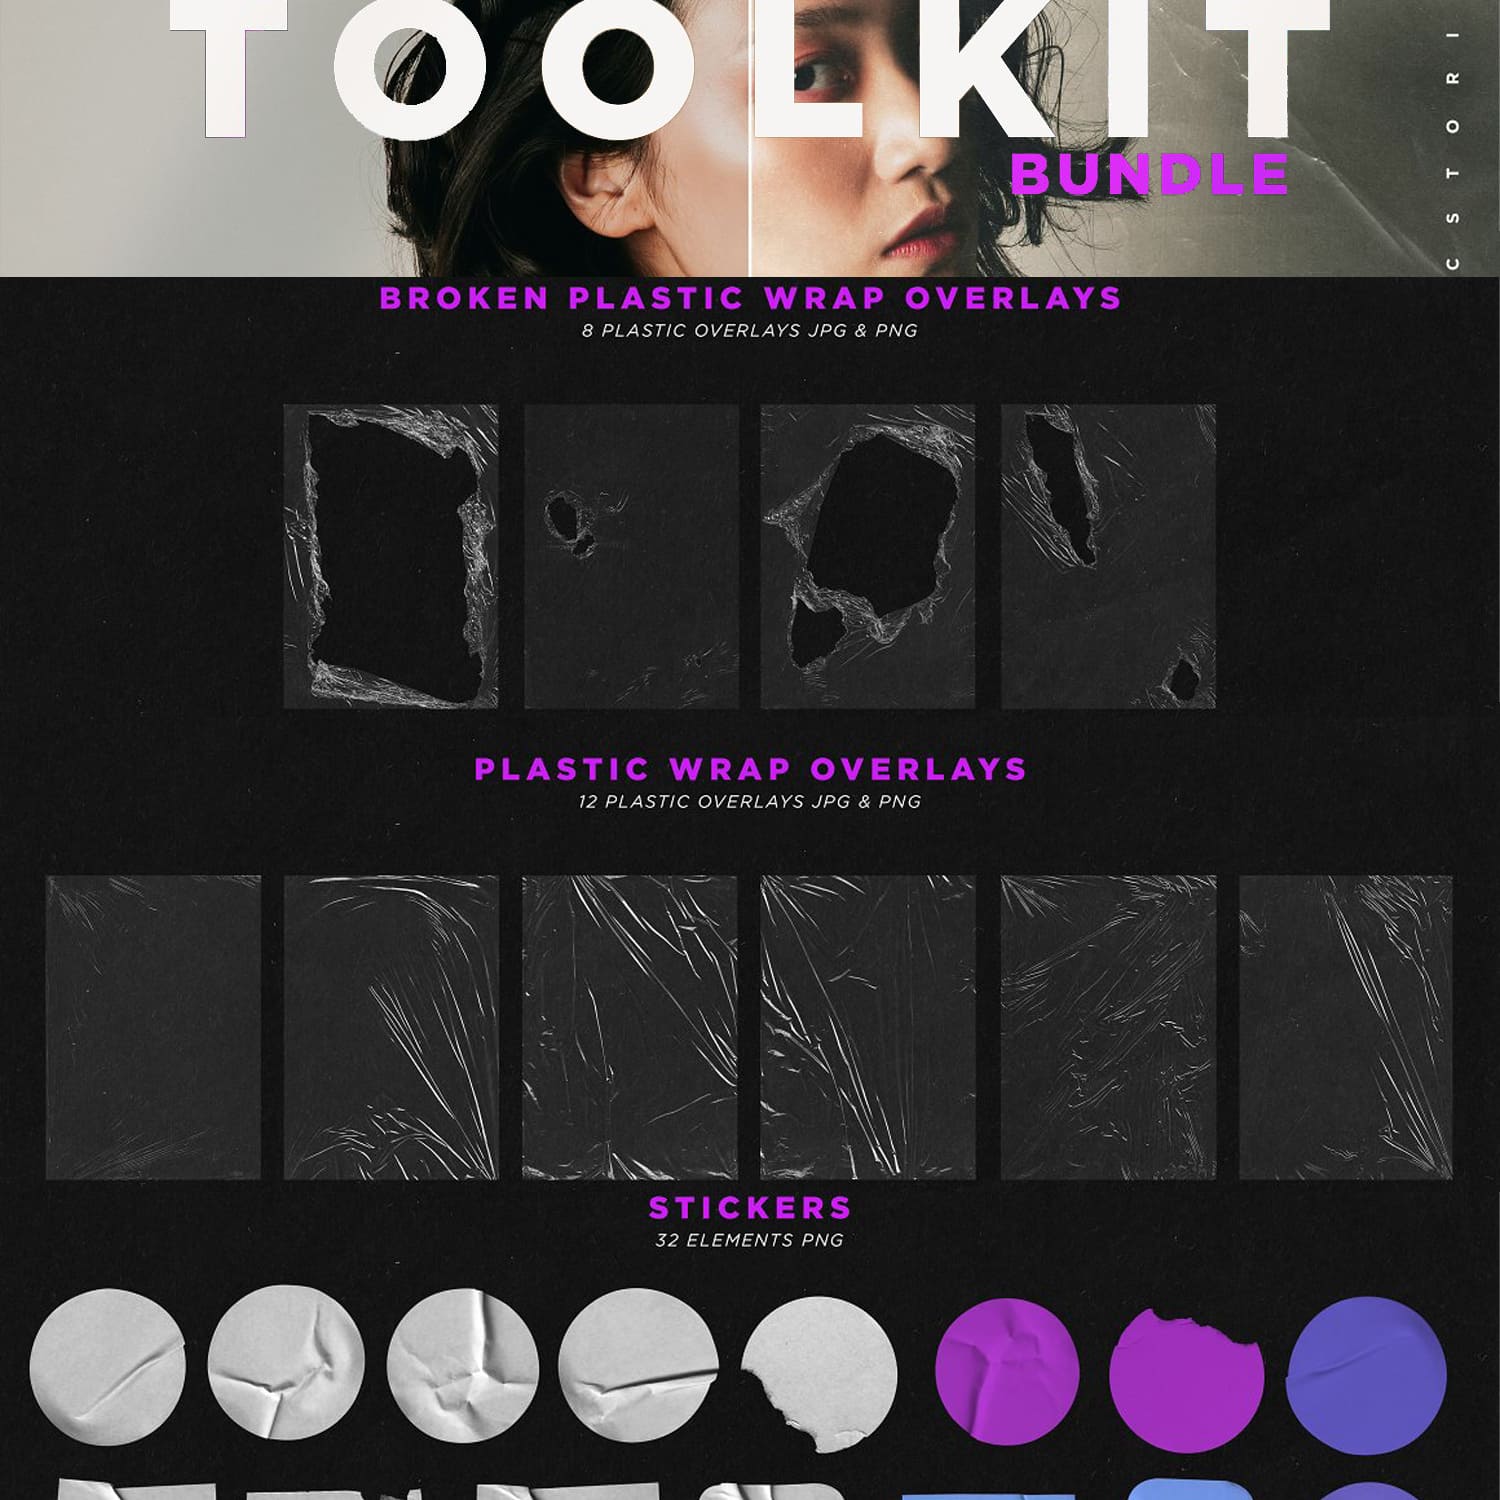 Preview ultimate toolkit bundle.